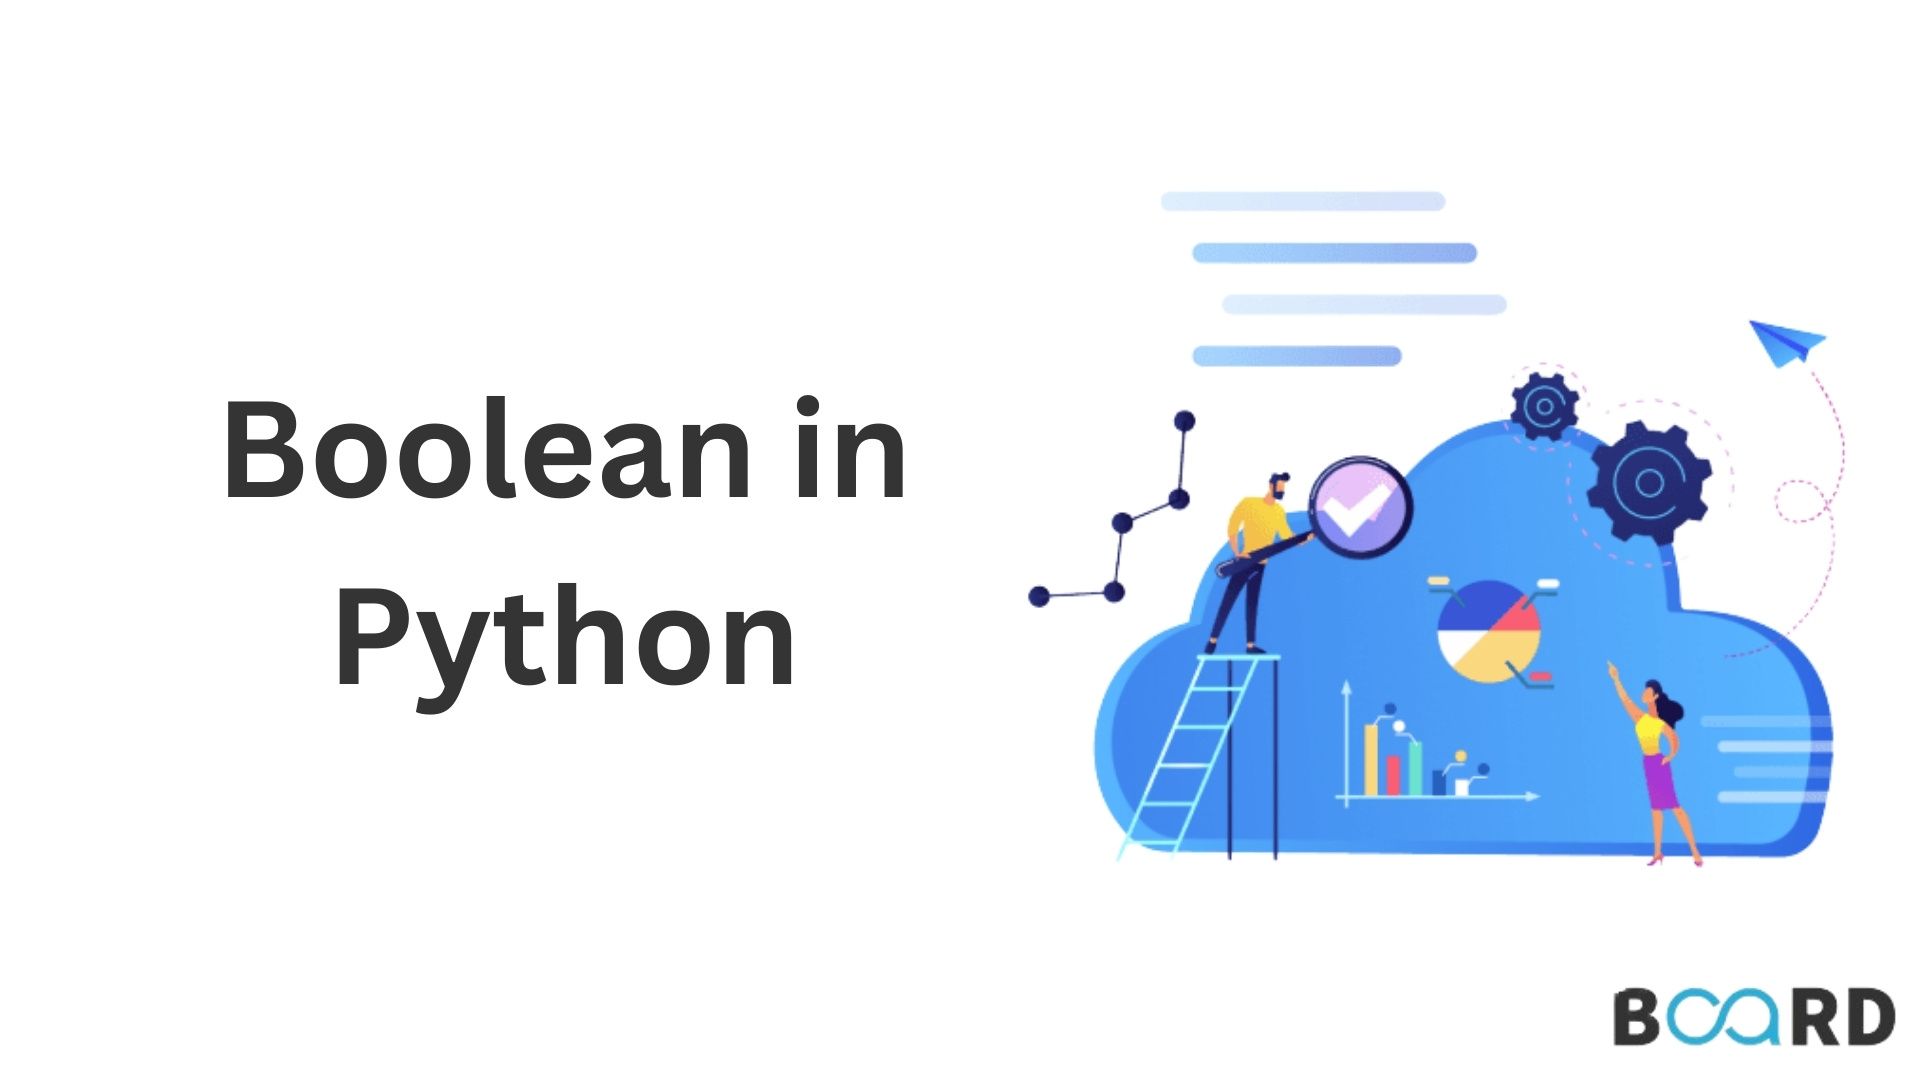 Learn about Boolean in Python